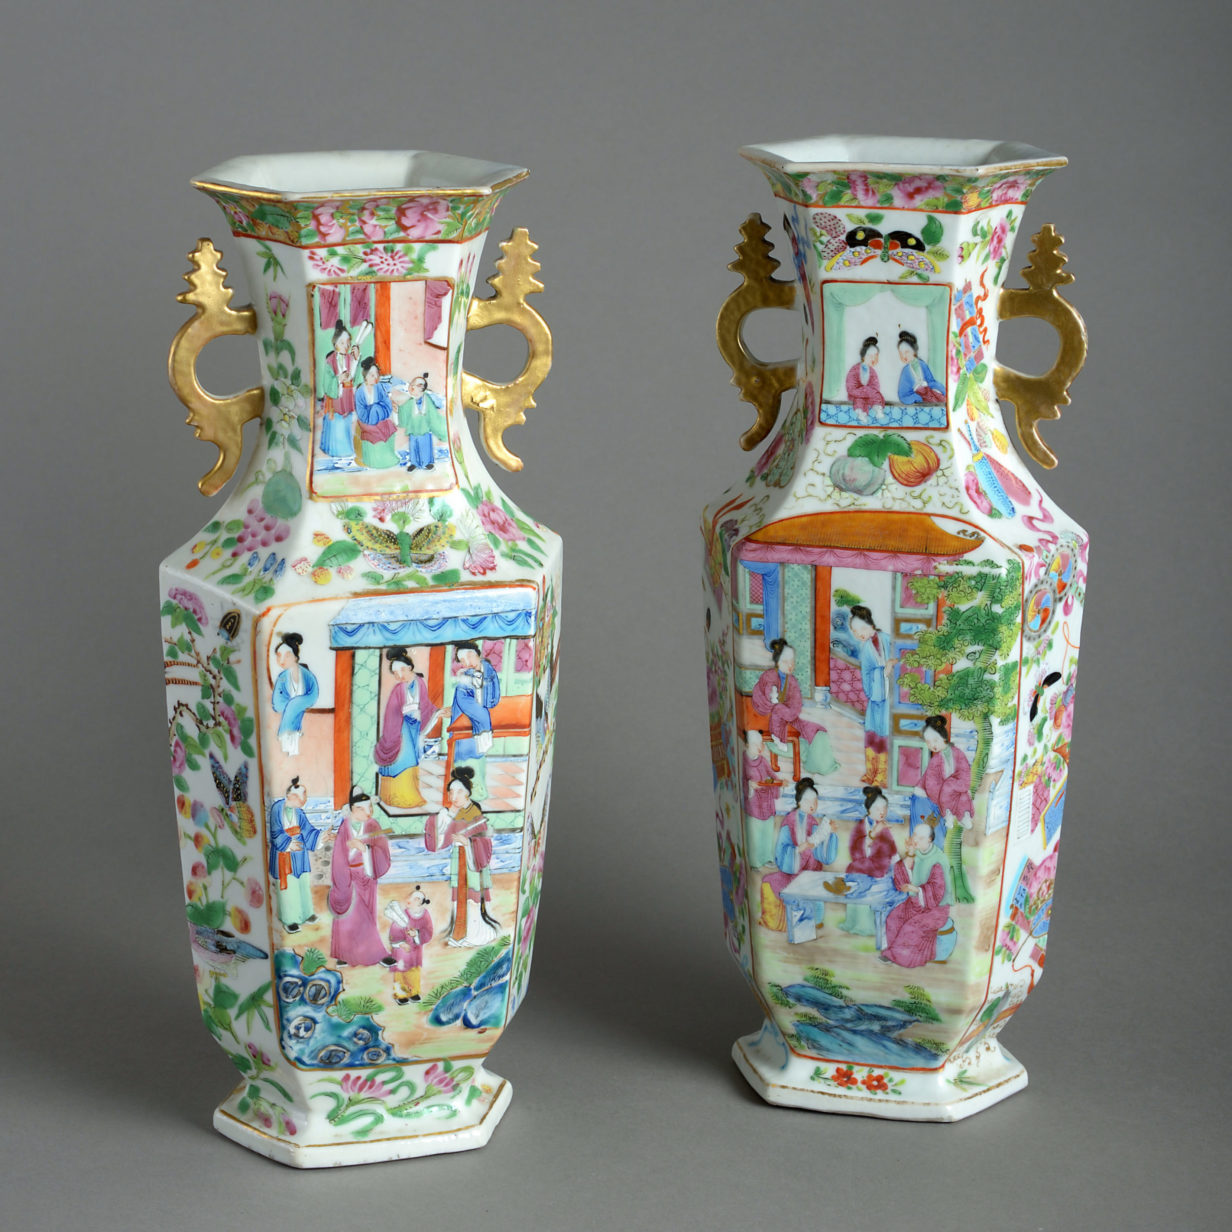 A 19th century pair of canton porcelain vases